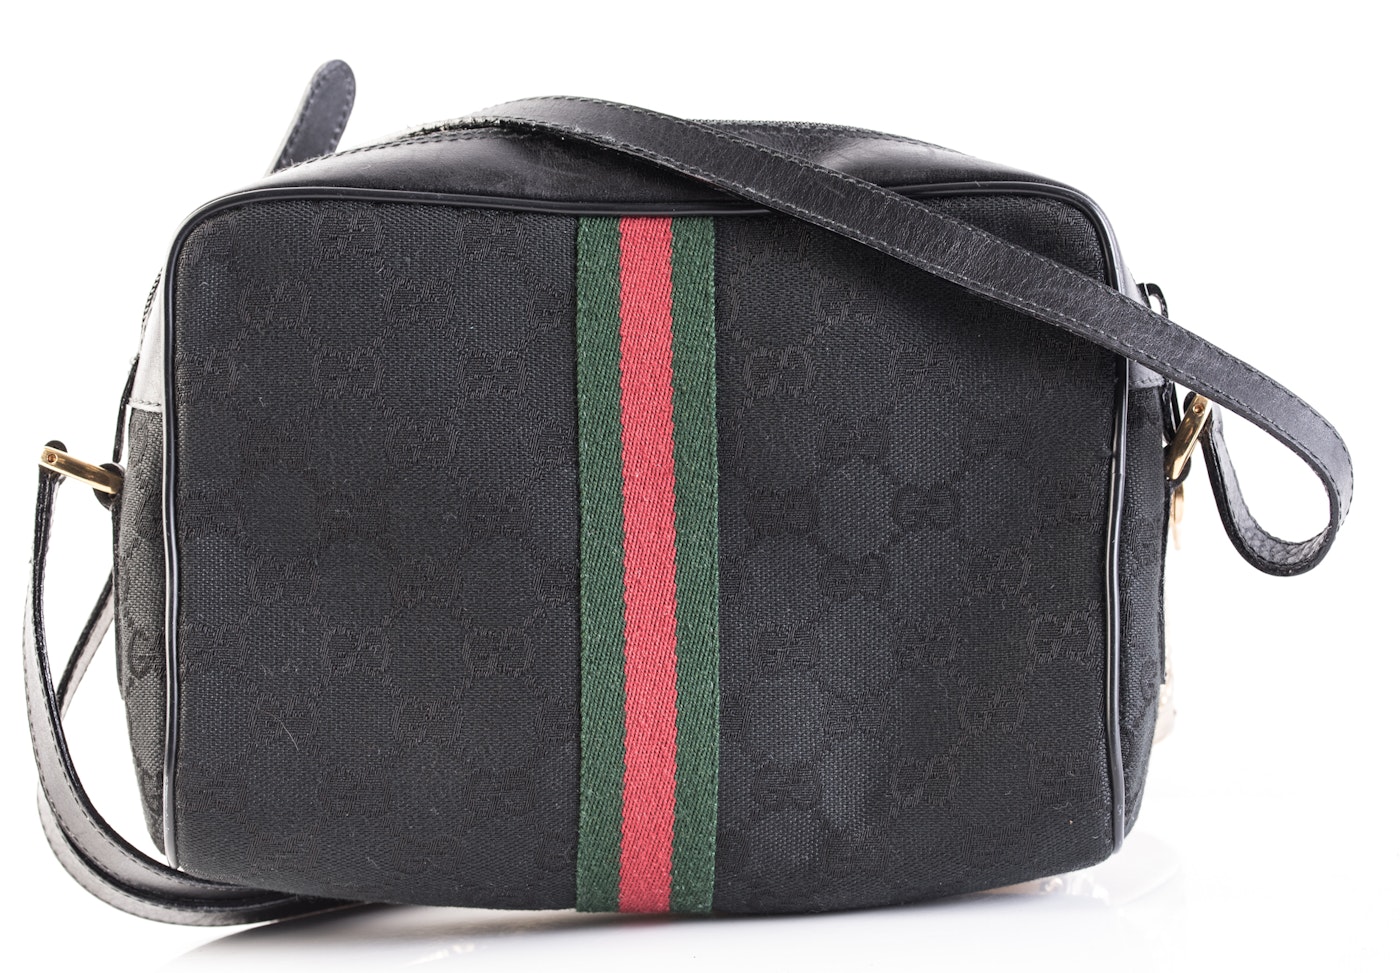 Vintage Gucci Accessory Collection Black Canvas and Leather Crossbody Bag | EBTH